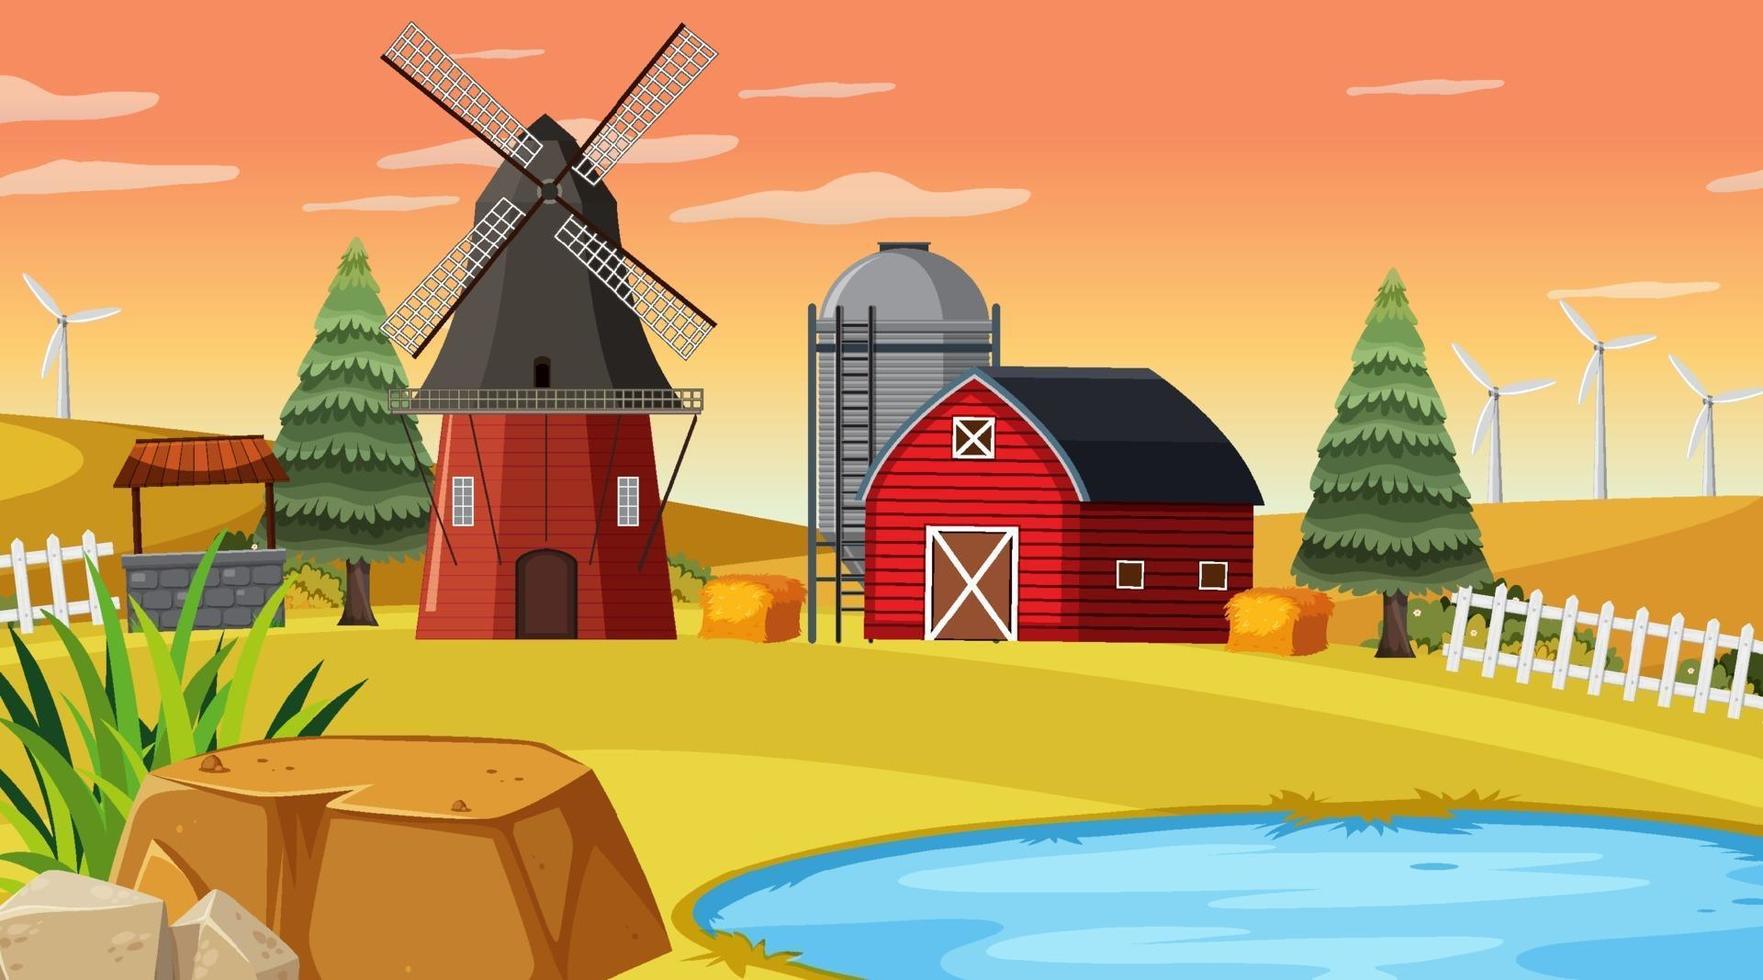 Empty farm at sunset time scene with red barn and windmill vector